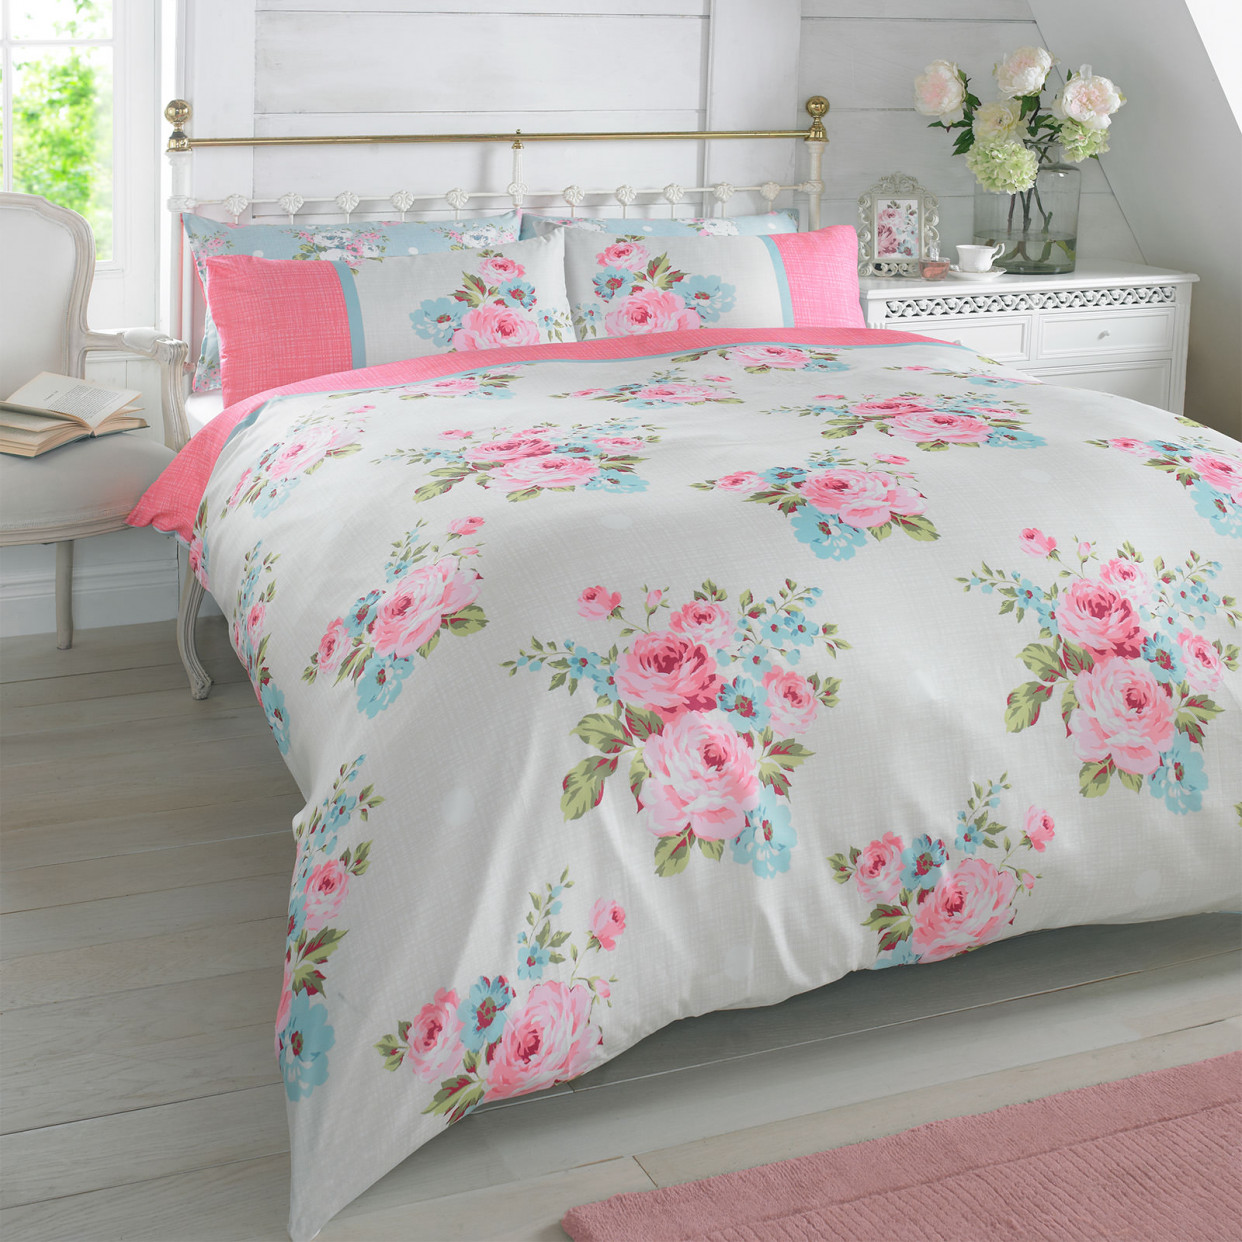 Duvet Cover with Pillowcase Bedding Set Floral Rosie Pink Blue Green - Double>